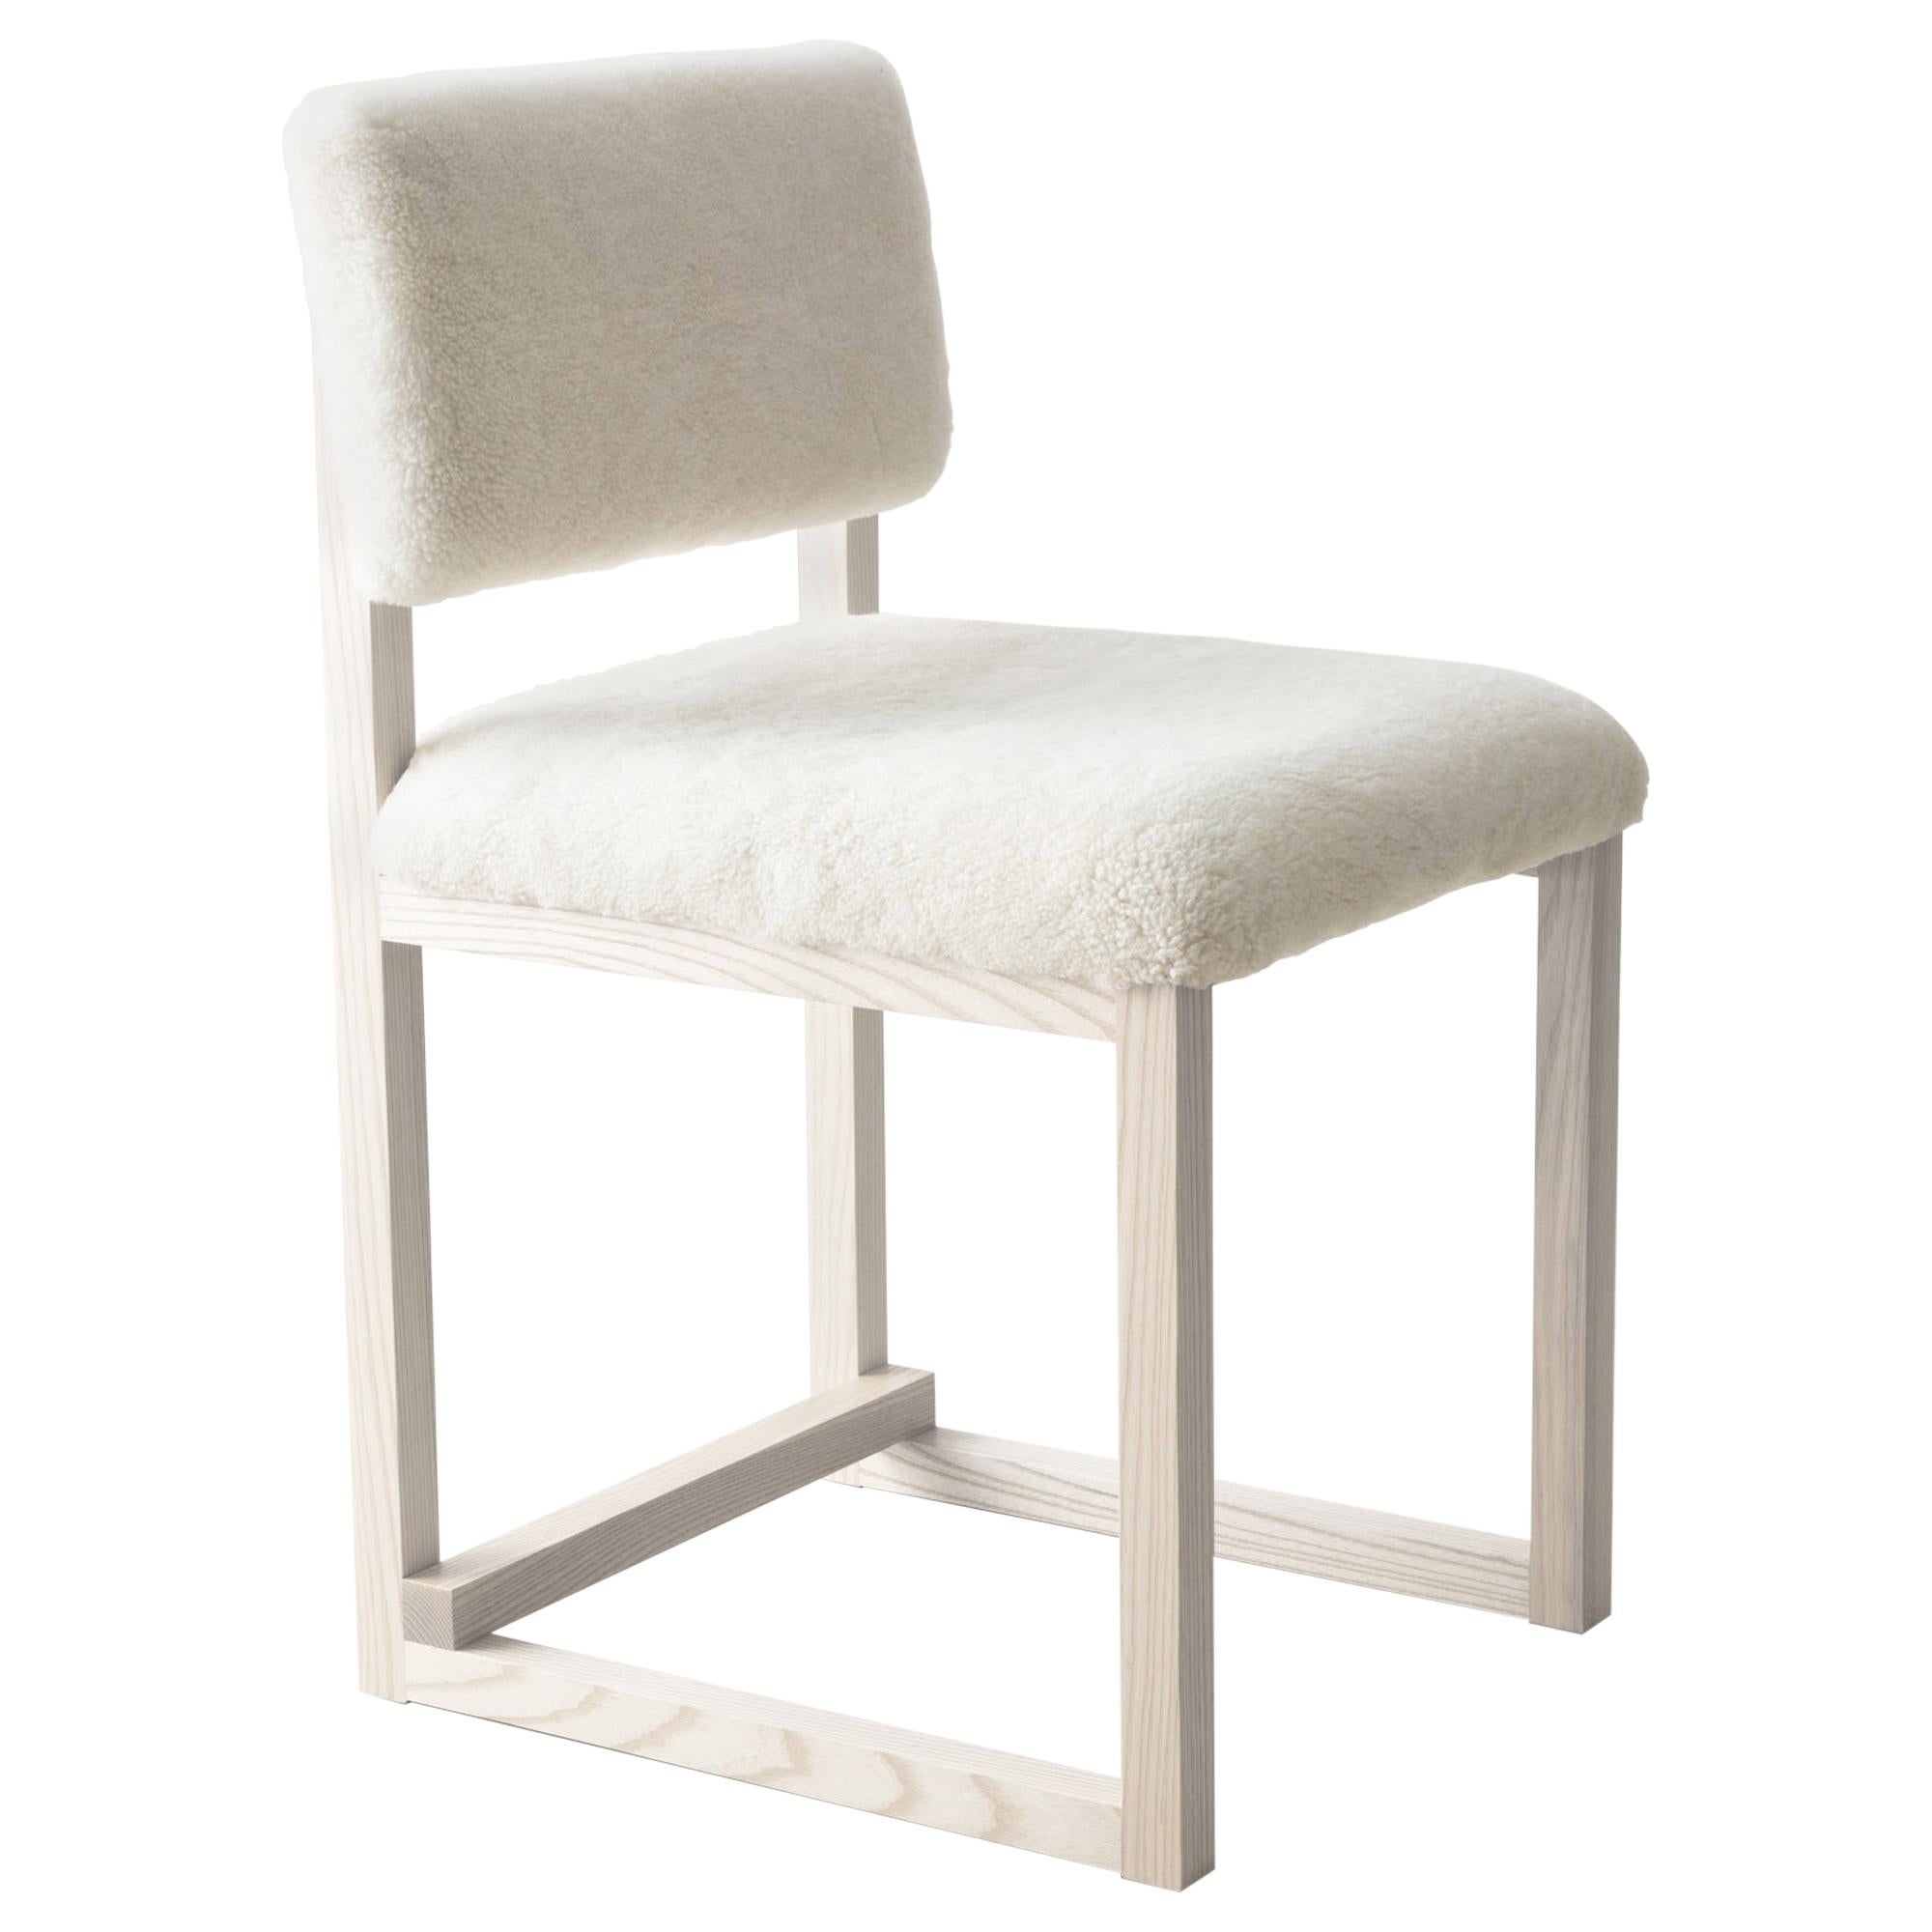 SQ Upholstered Dining Chair Special Edition, Shearling or COM, Solid Ash, Brass